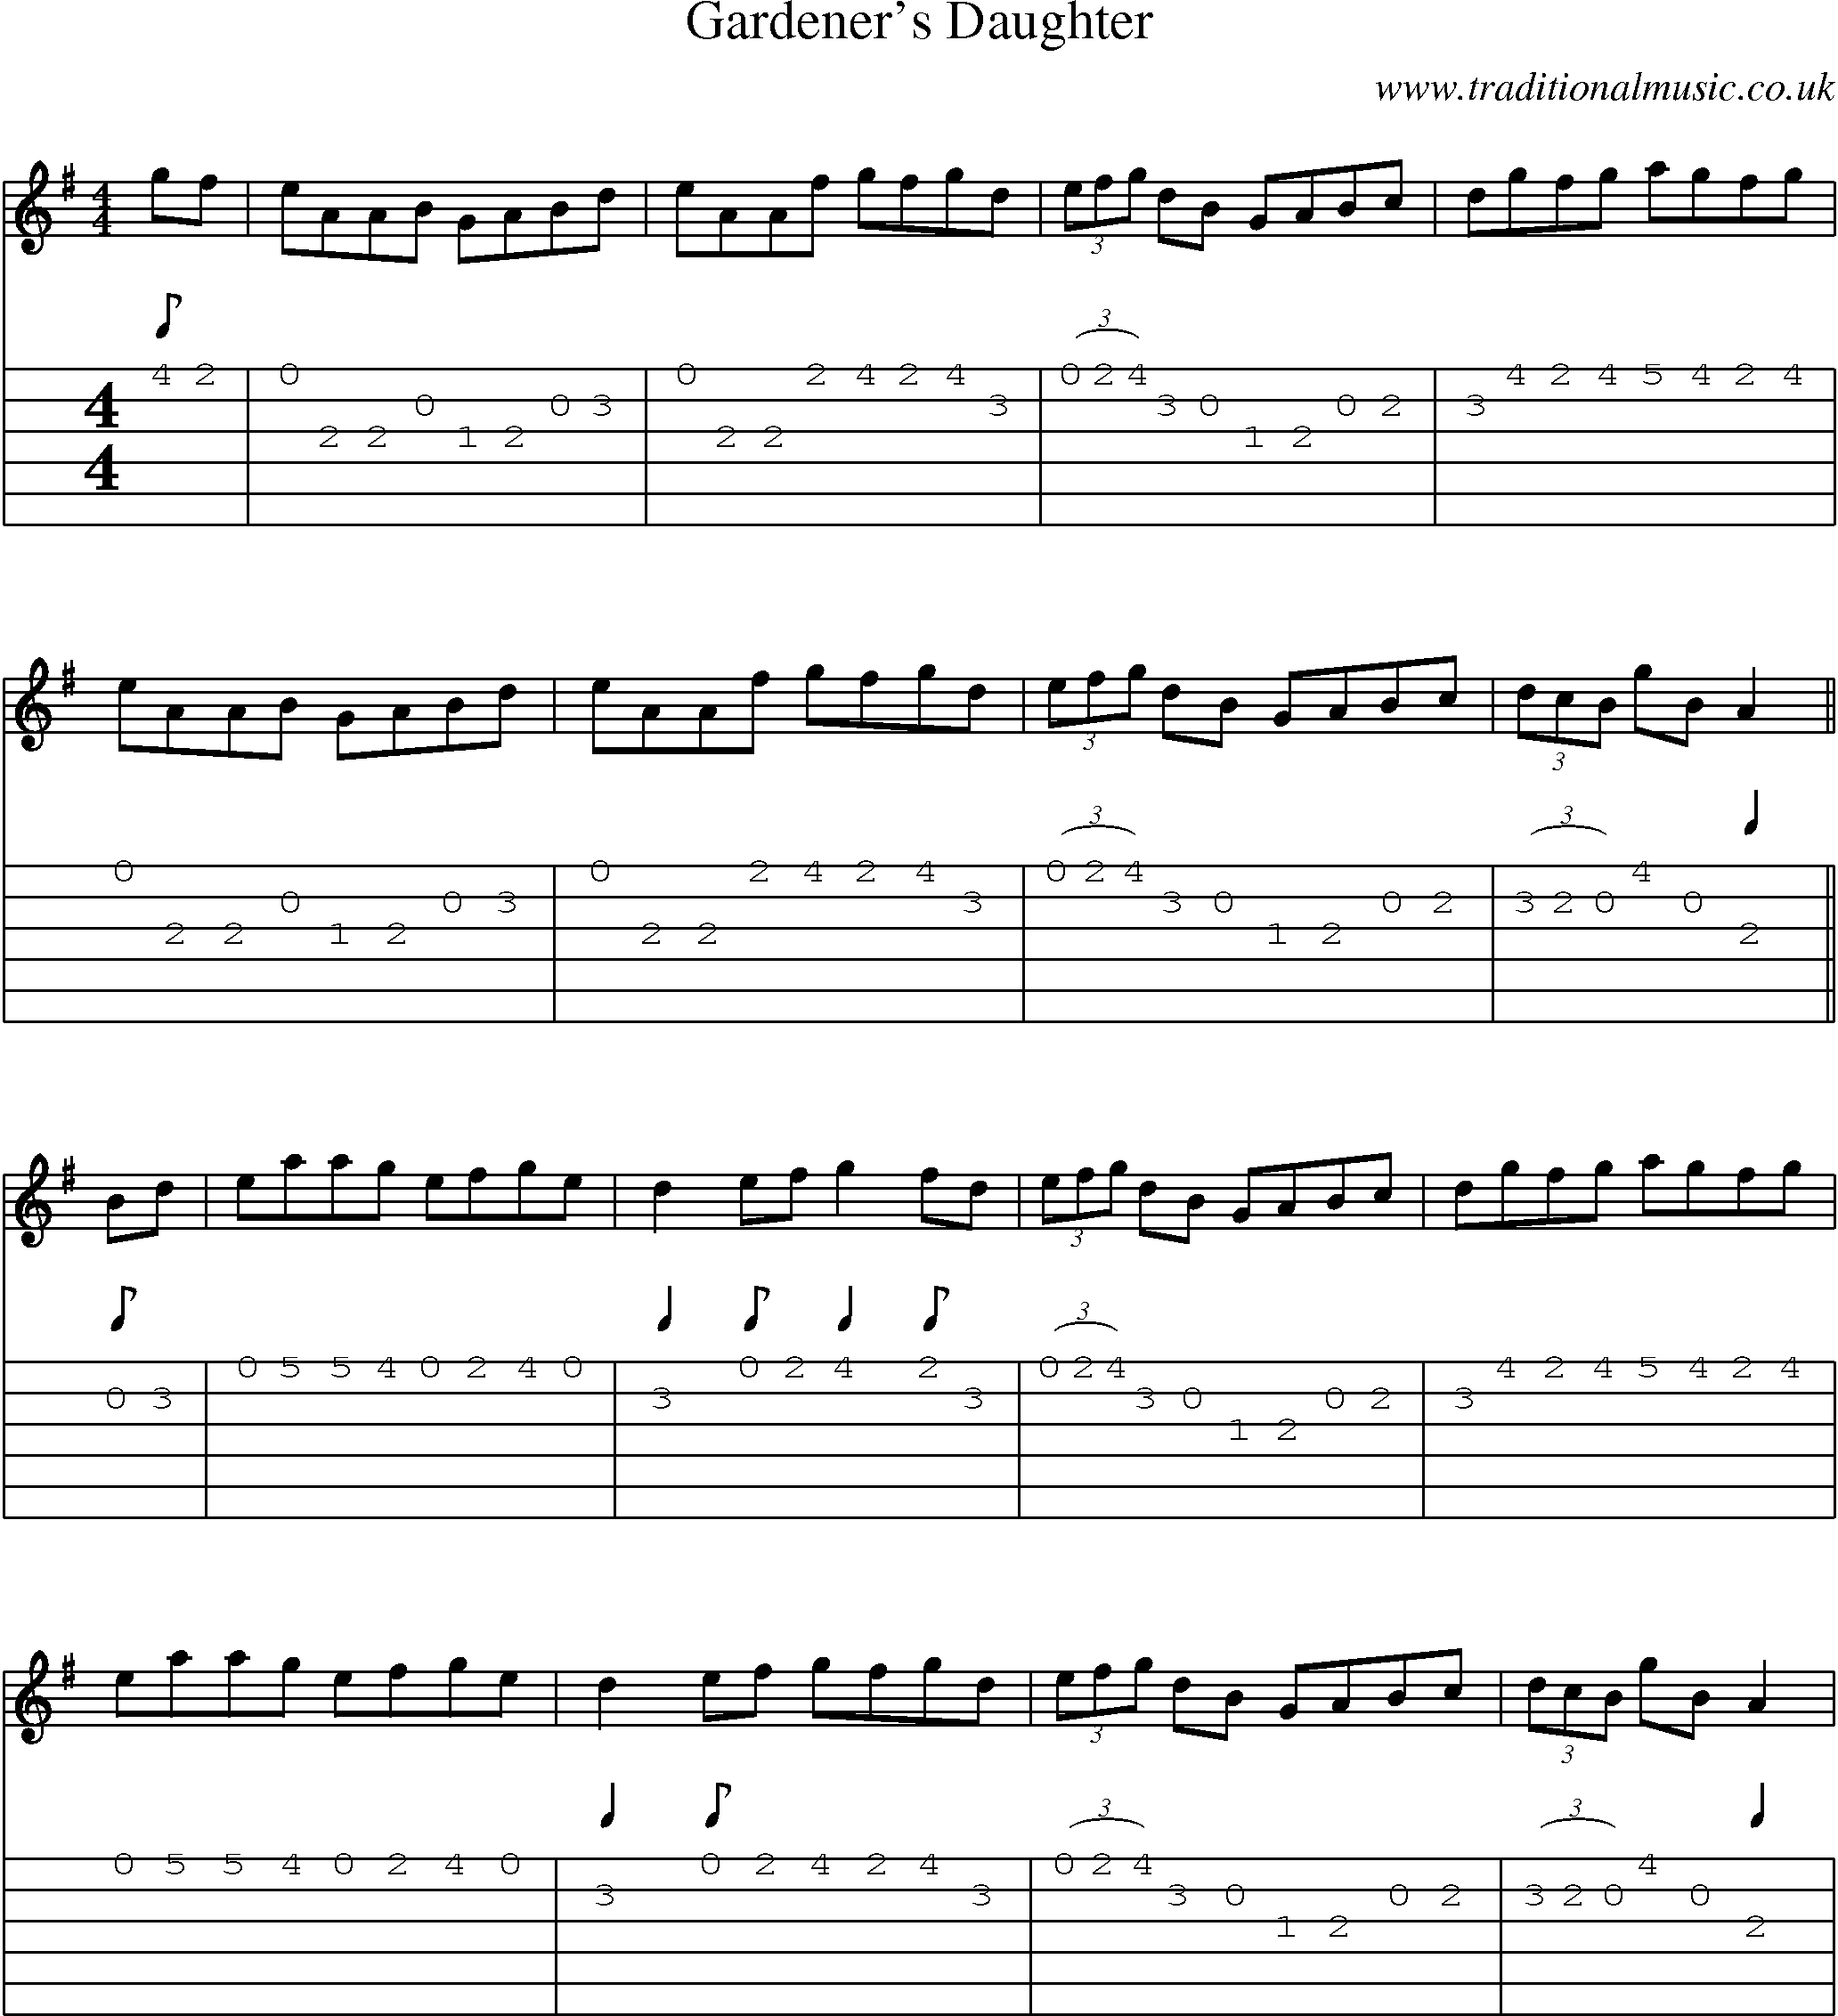 Music Score and Guitar Tabs for Gardeners Daughter